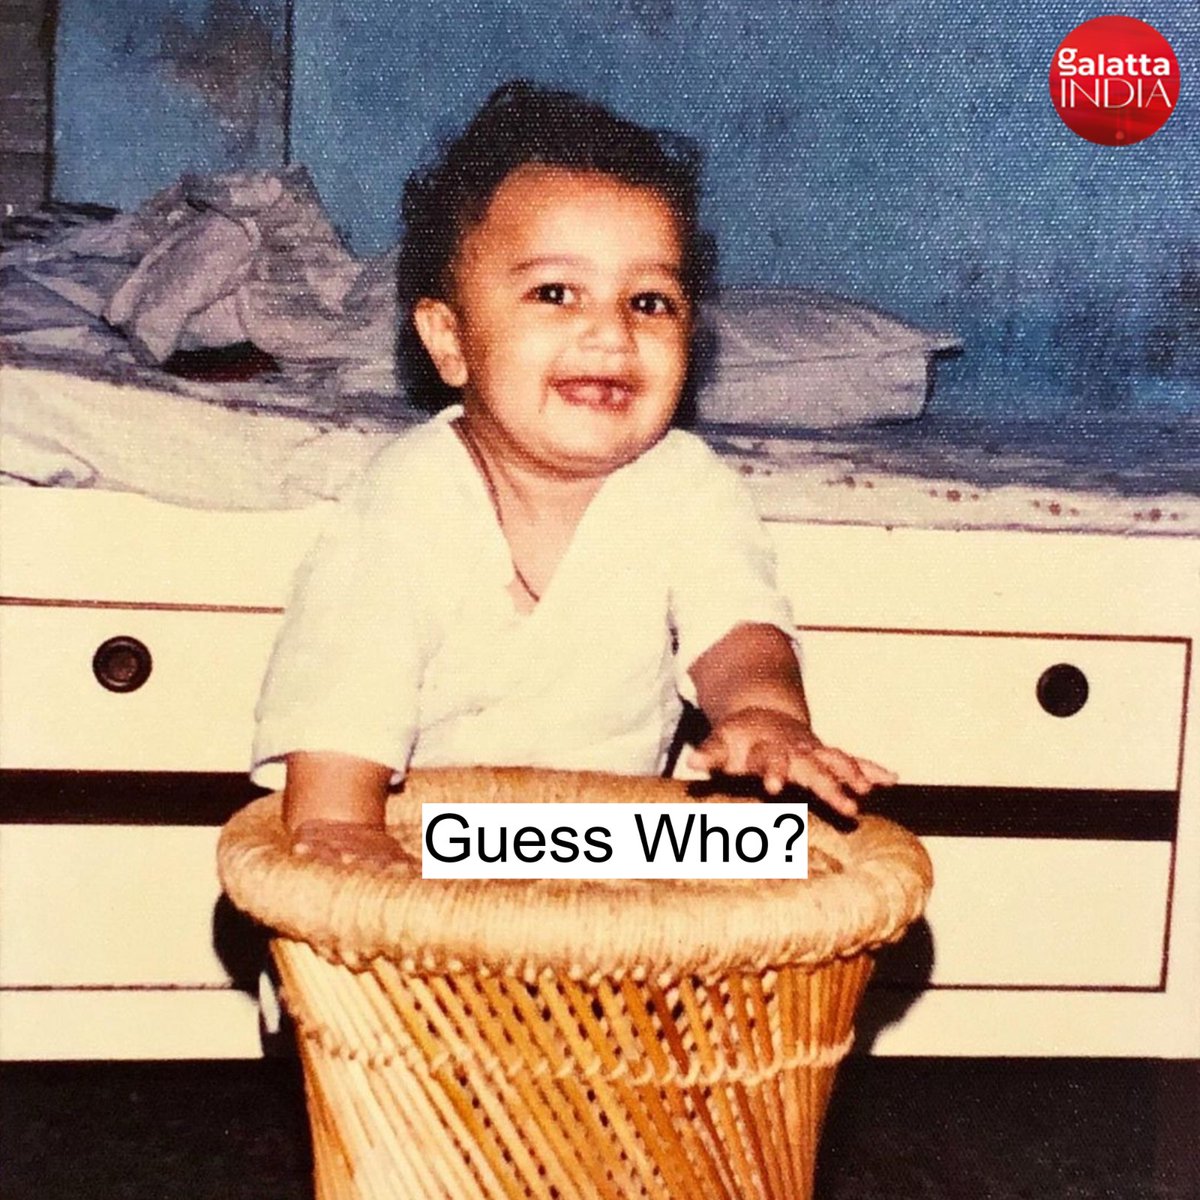 Guess the actor? 

Hint: A National Award-winning actor who is celebrating his birthday today 😉 

#Guess #GuessWho #GuessWhoAmI #Bollywood #GalattaIndia